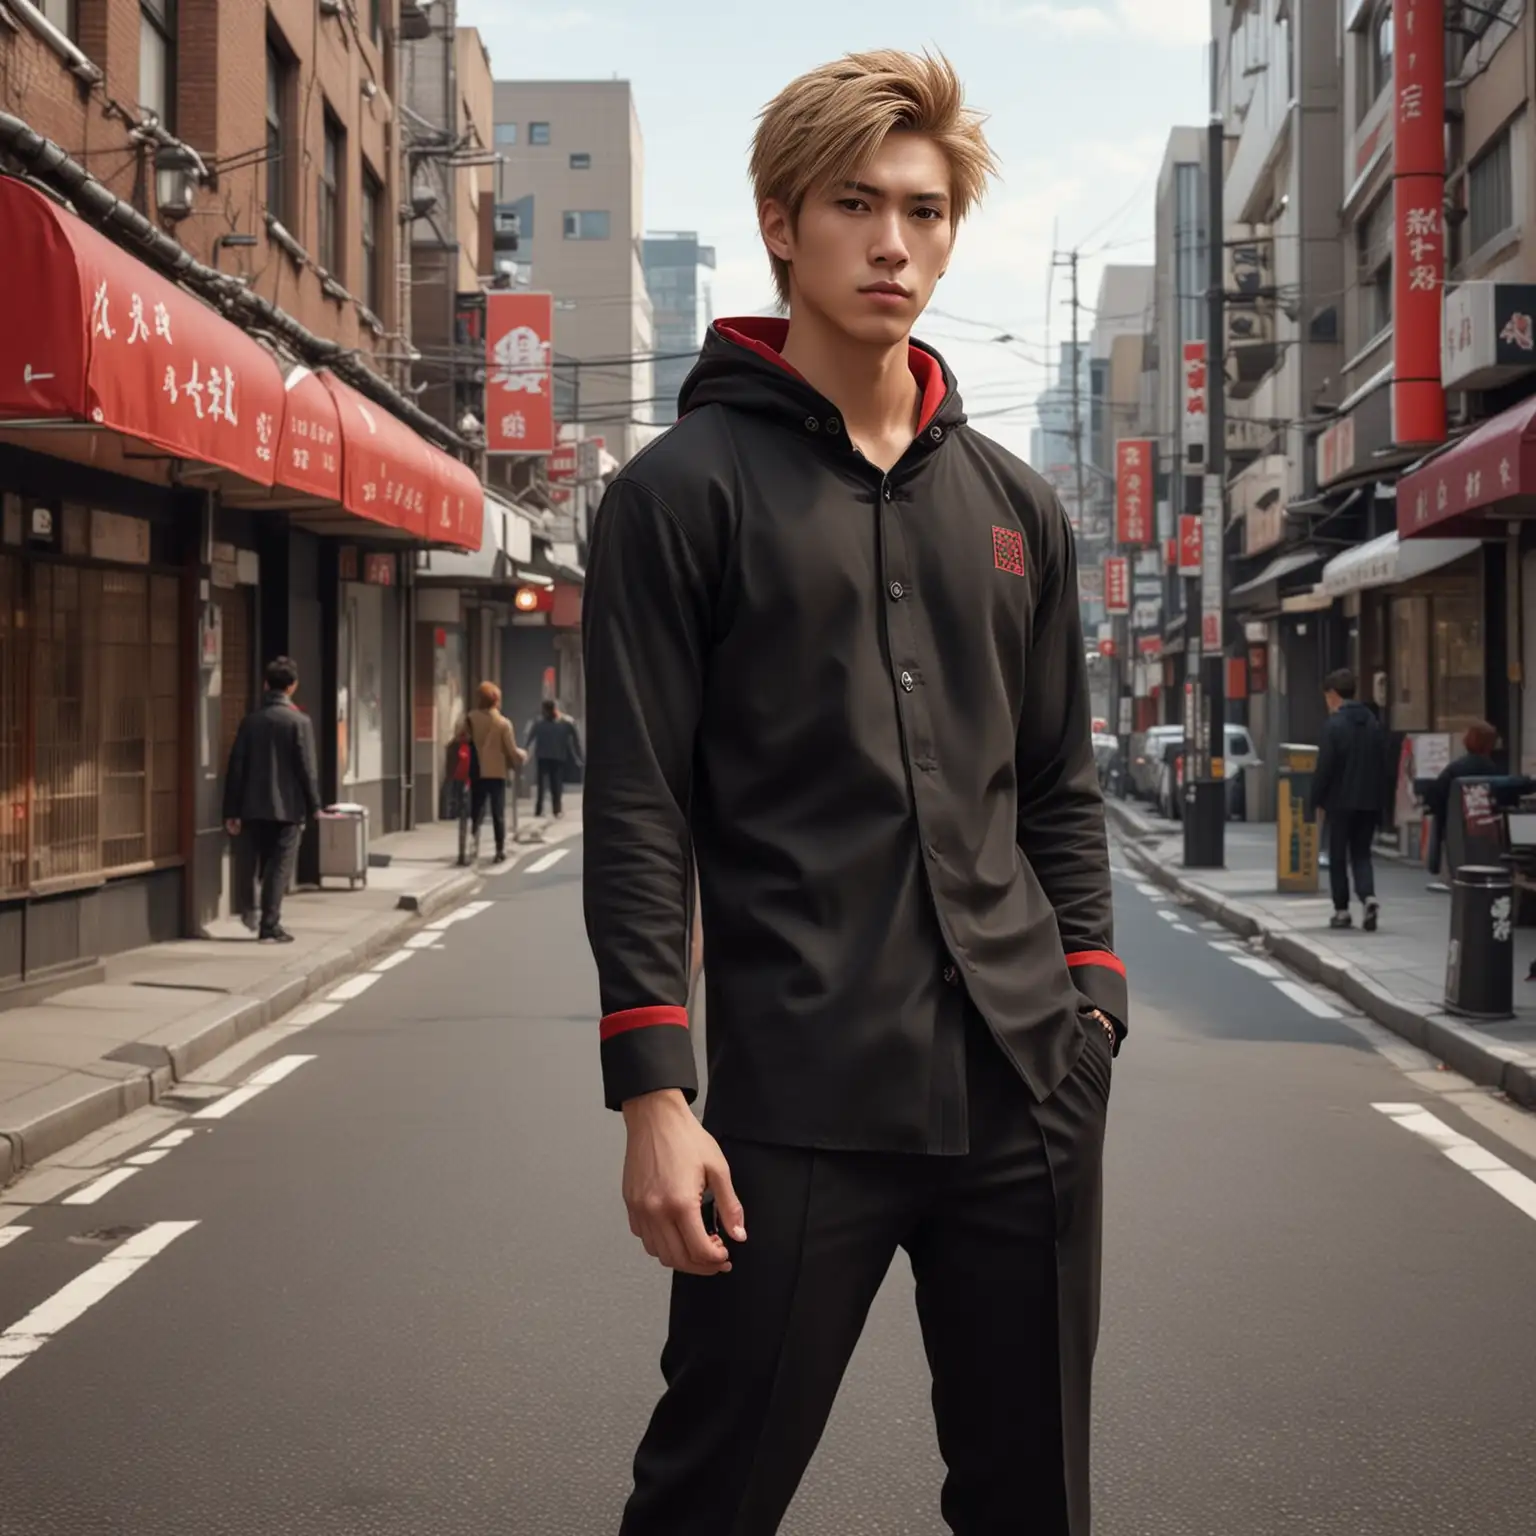 young man of average height and has a lean and muscular physique,  has relatively large light brown eyes and spiky brownish blonde hair that's styled in an undercut fashion, a black traditional japanese school uniform with red hood, black pants, and red shoes, dark Tokyo streets on background, hyper-realistic, photo-realistic